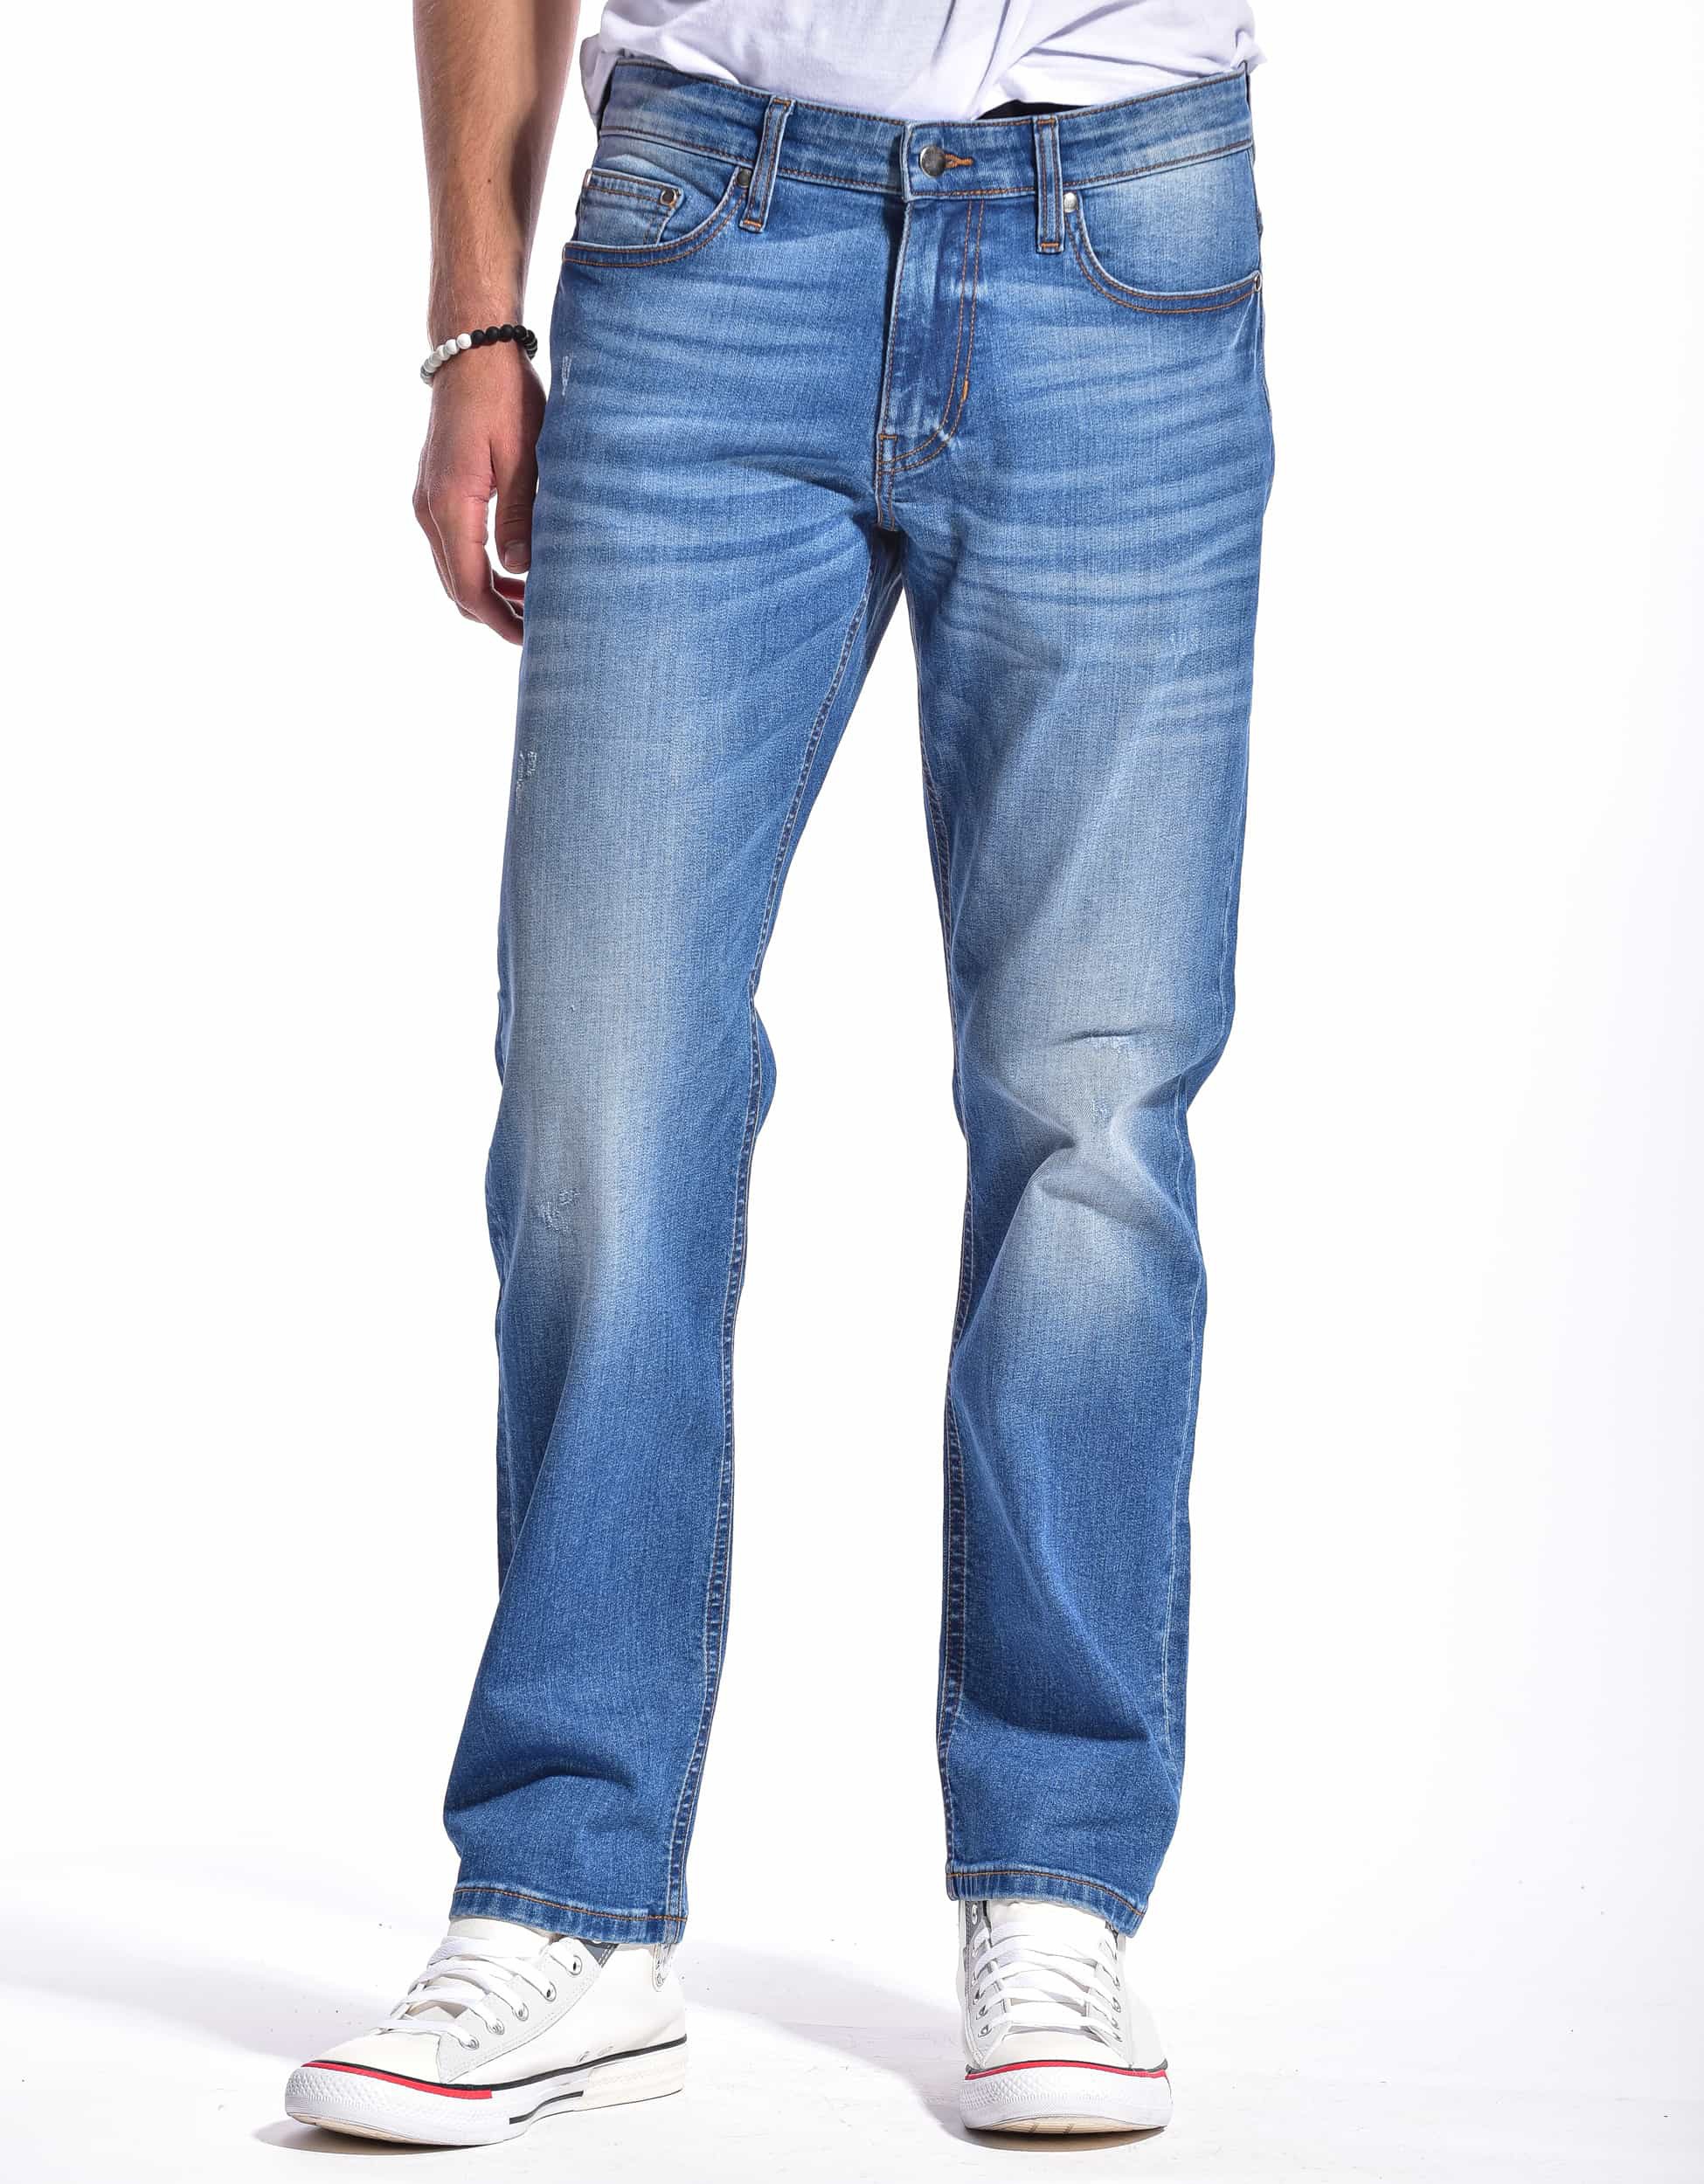 DEPARTED MEN'S PARK AVENUE STRAIGHT JEANS - image 3 of 11